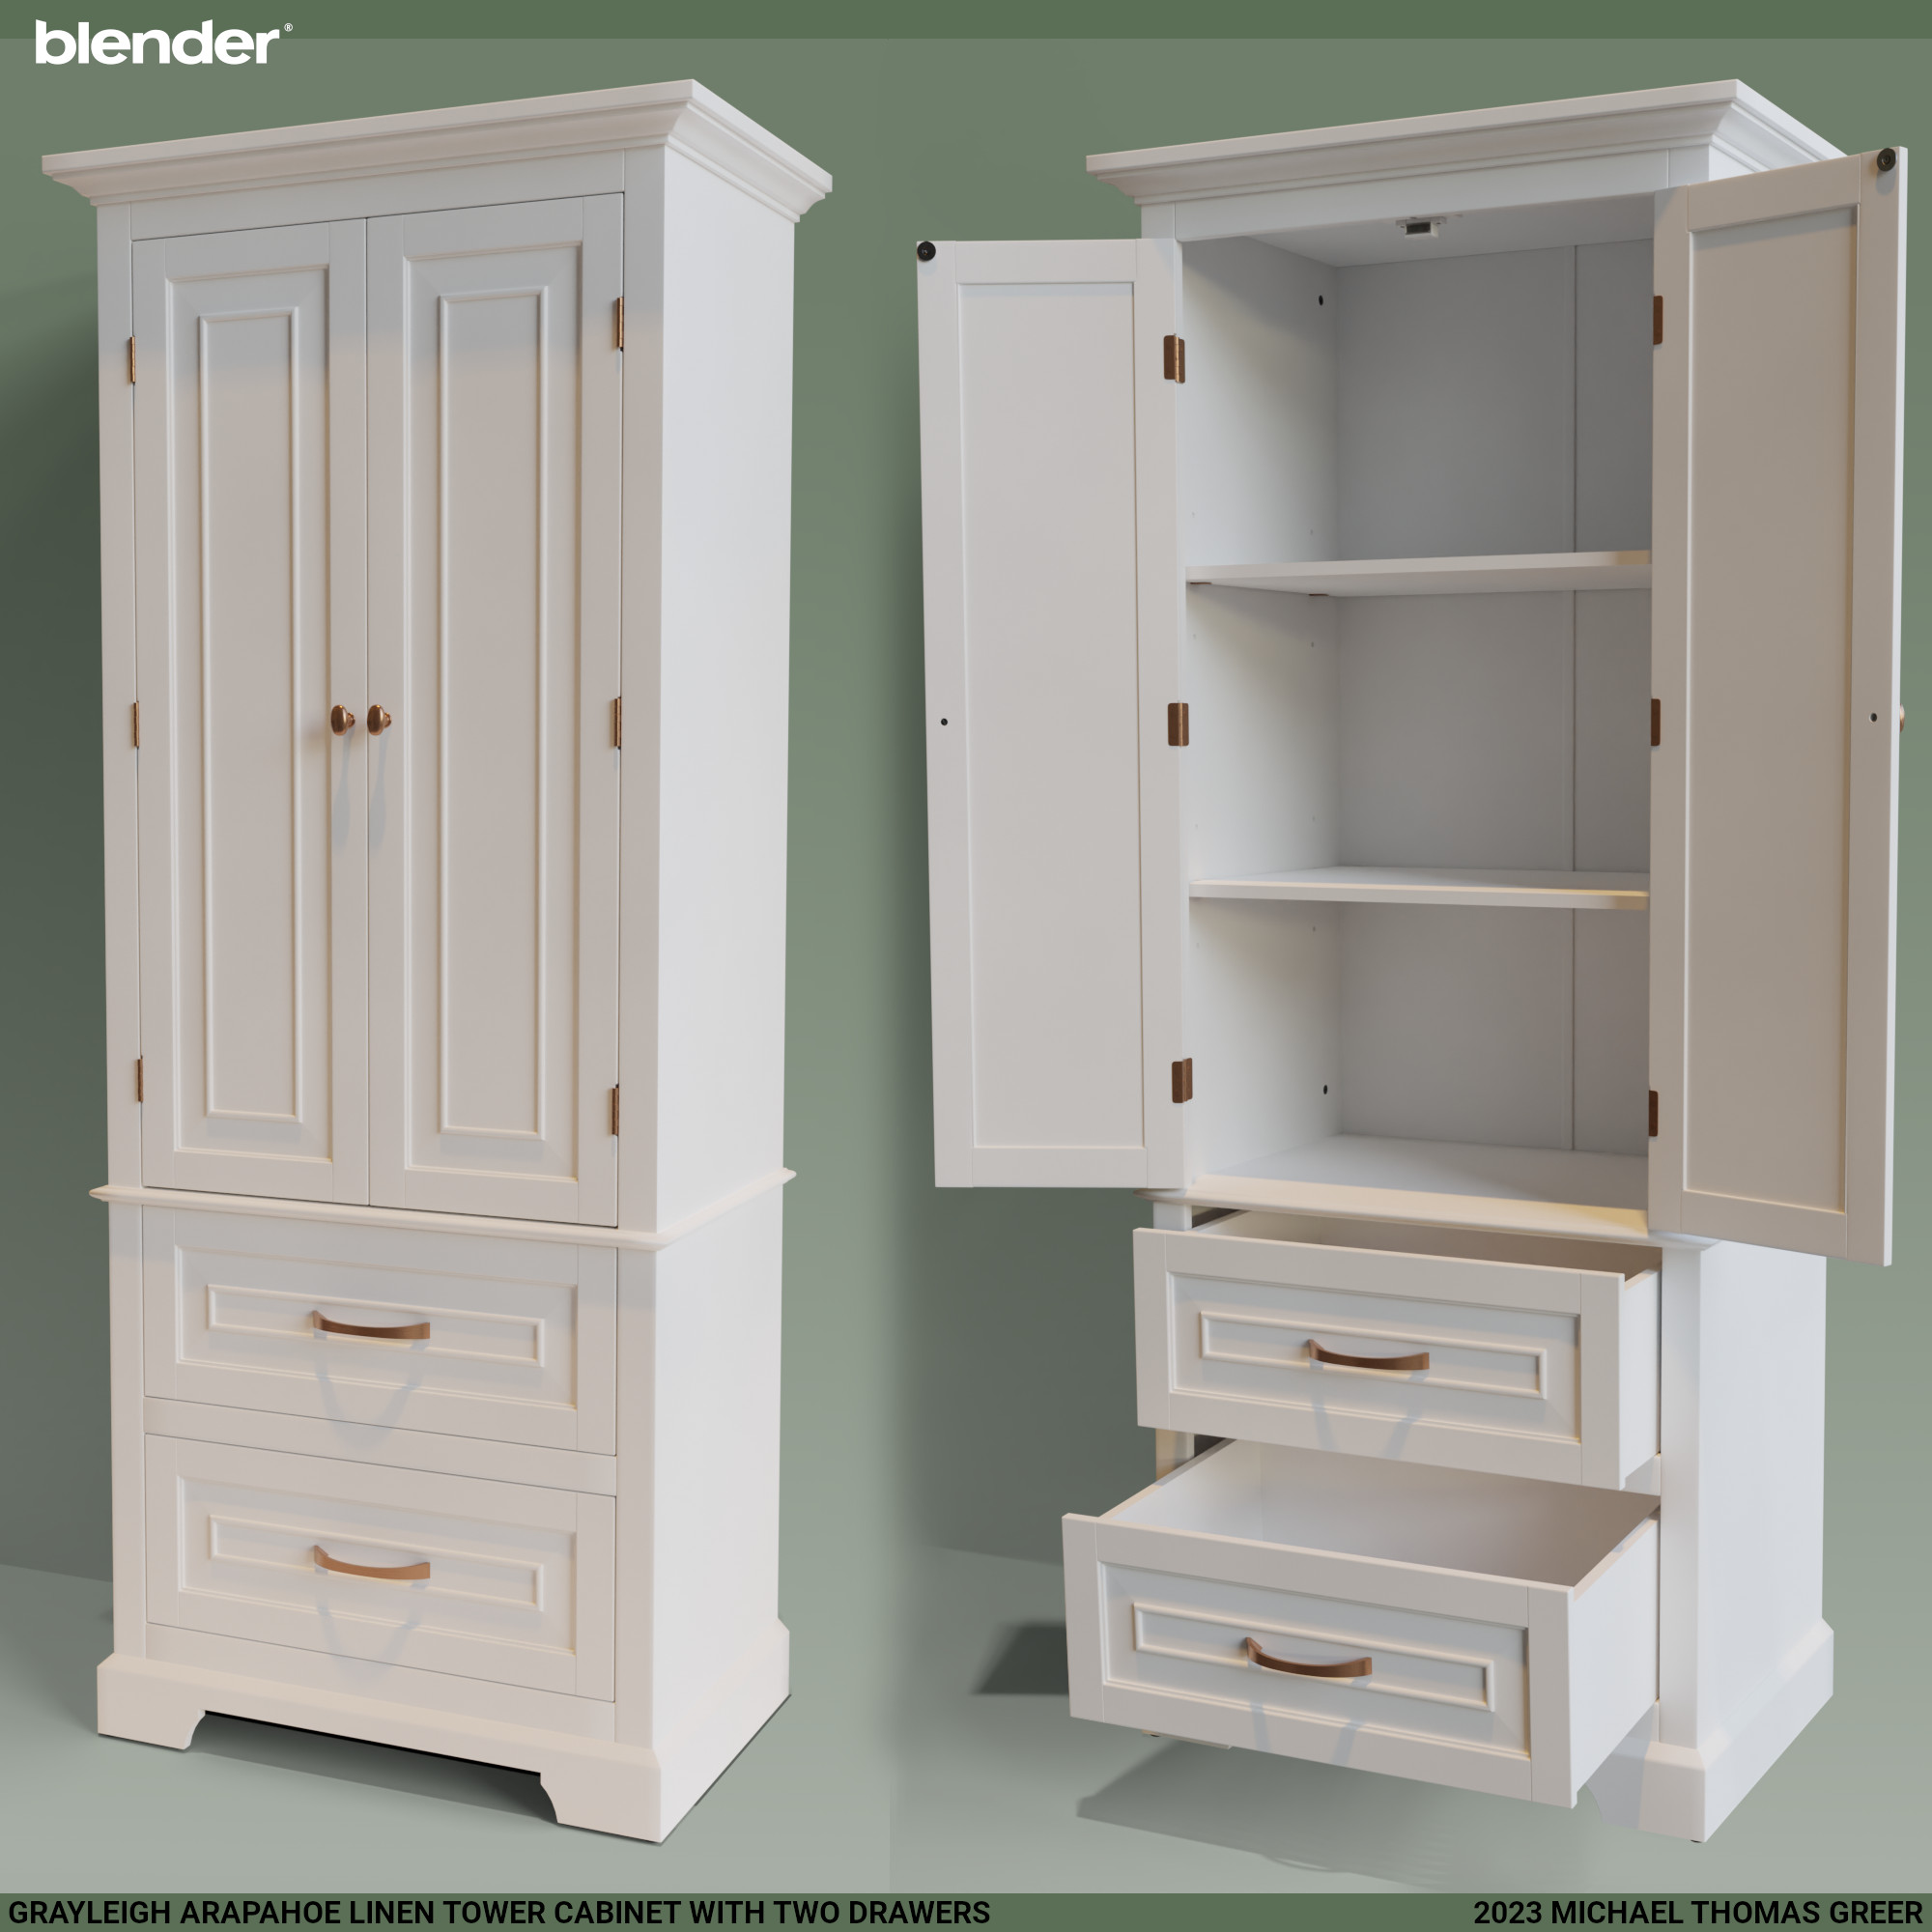 Grayleigh Arapahoe Tower Cabinet with Two Drawers preview image 1